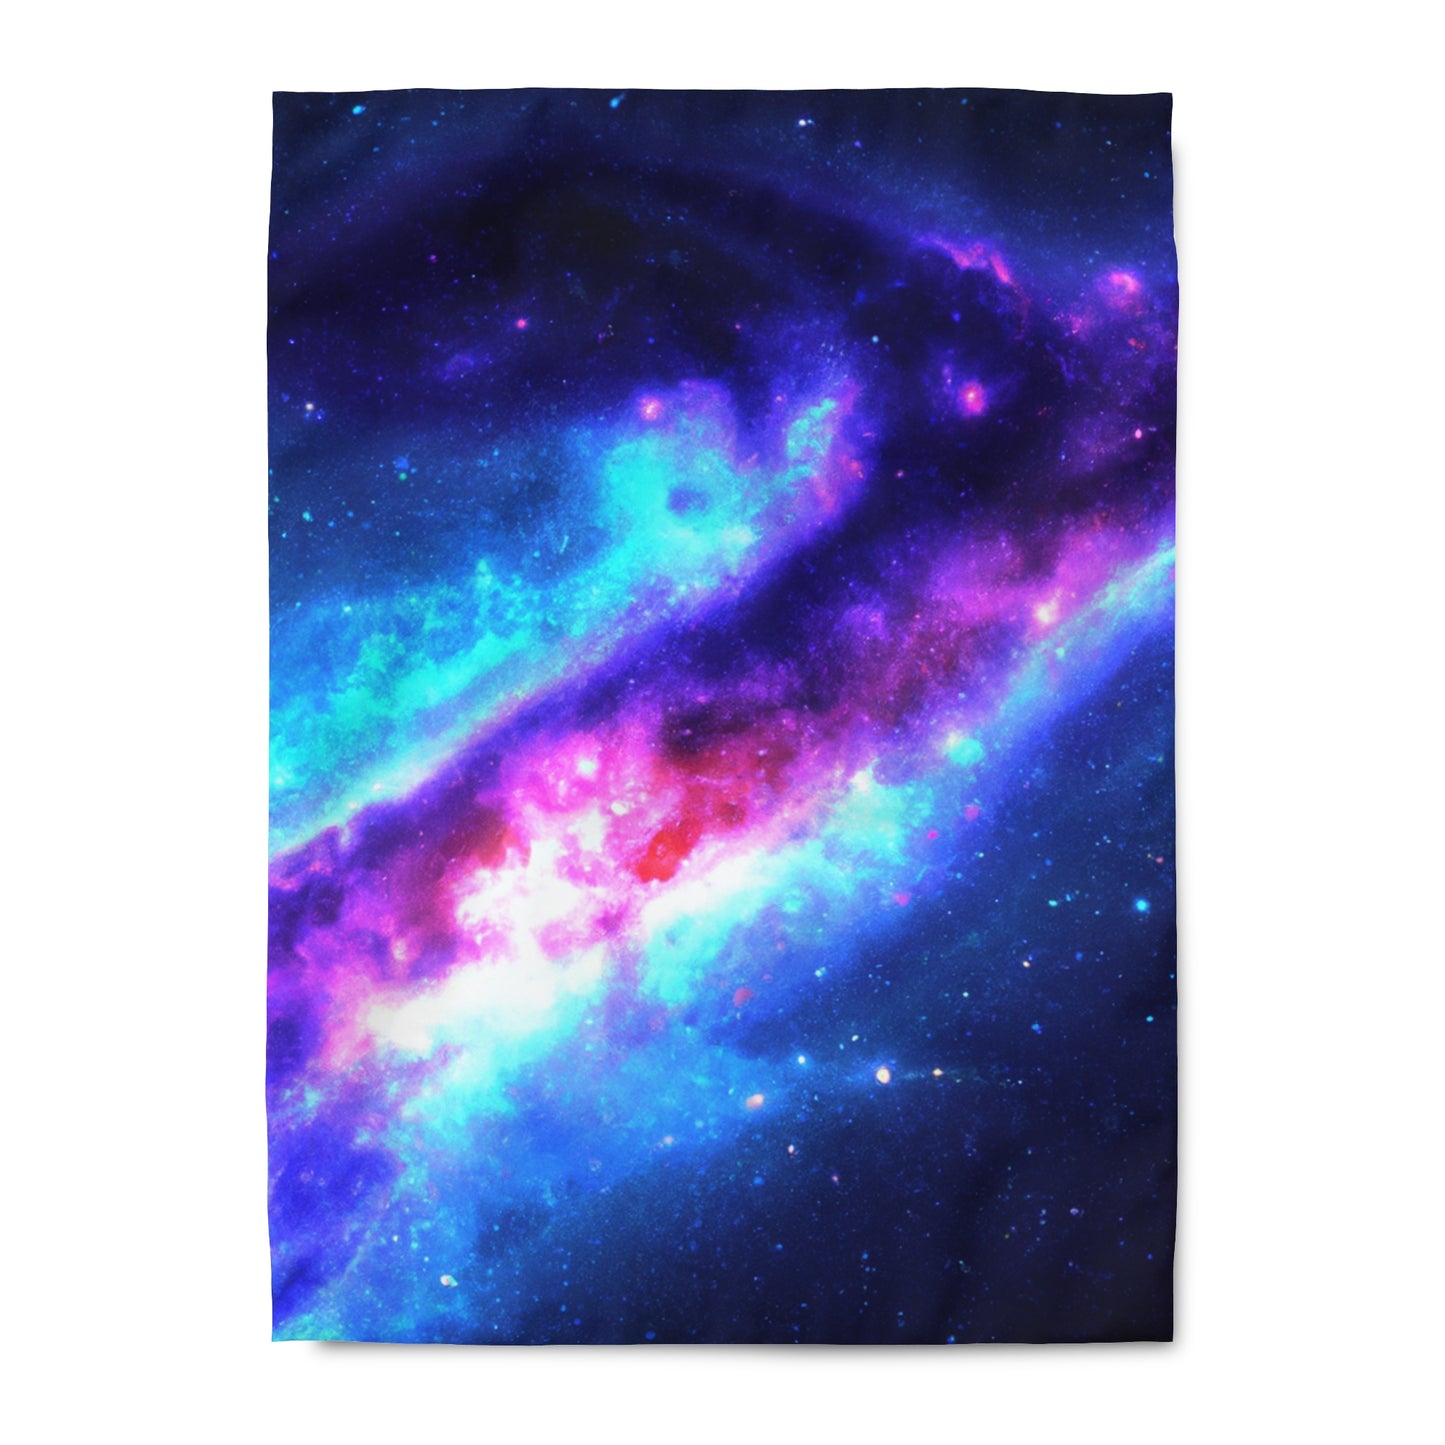 Serena's Dream of Space Exploration - Astronomy Duvet Bed Cover